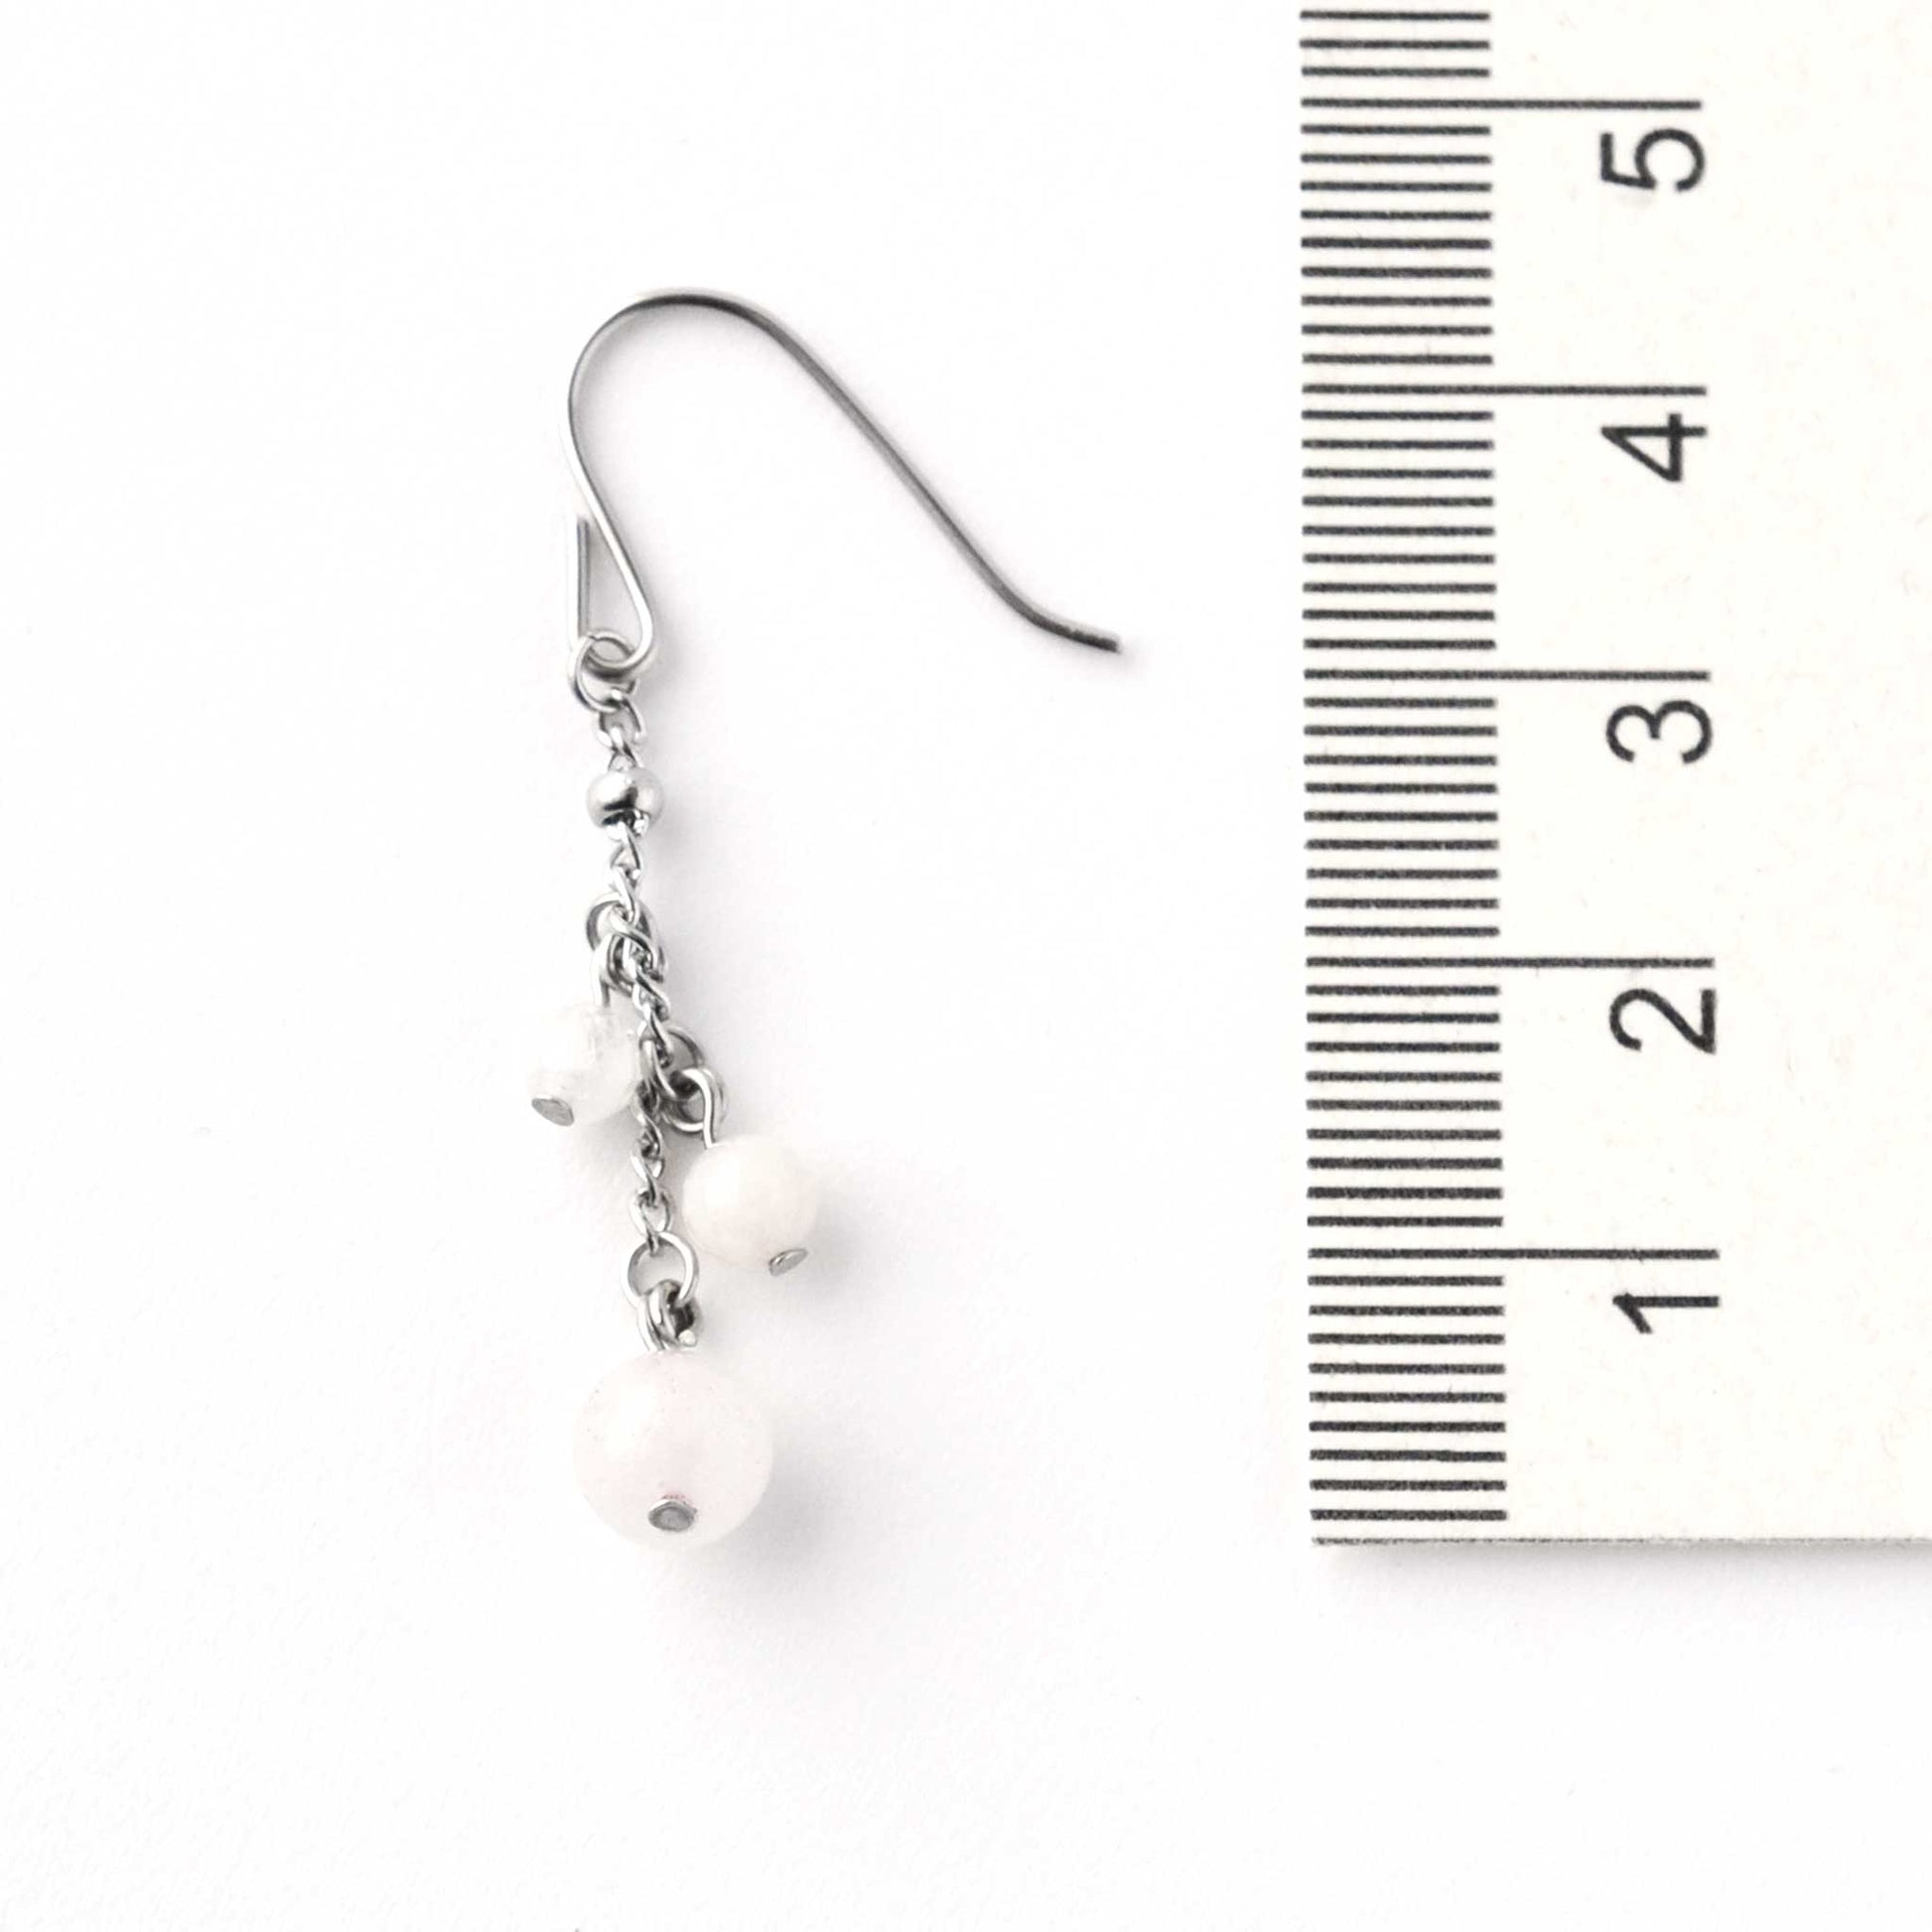 Pale pink gemstone drop earring next to ruler showing 4.5cm length